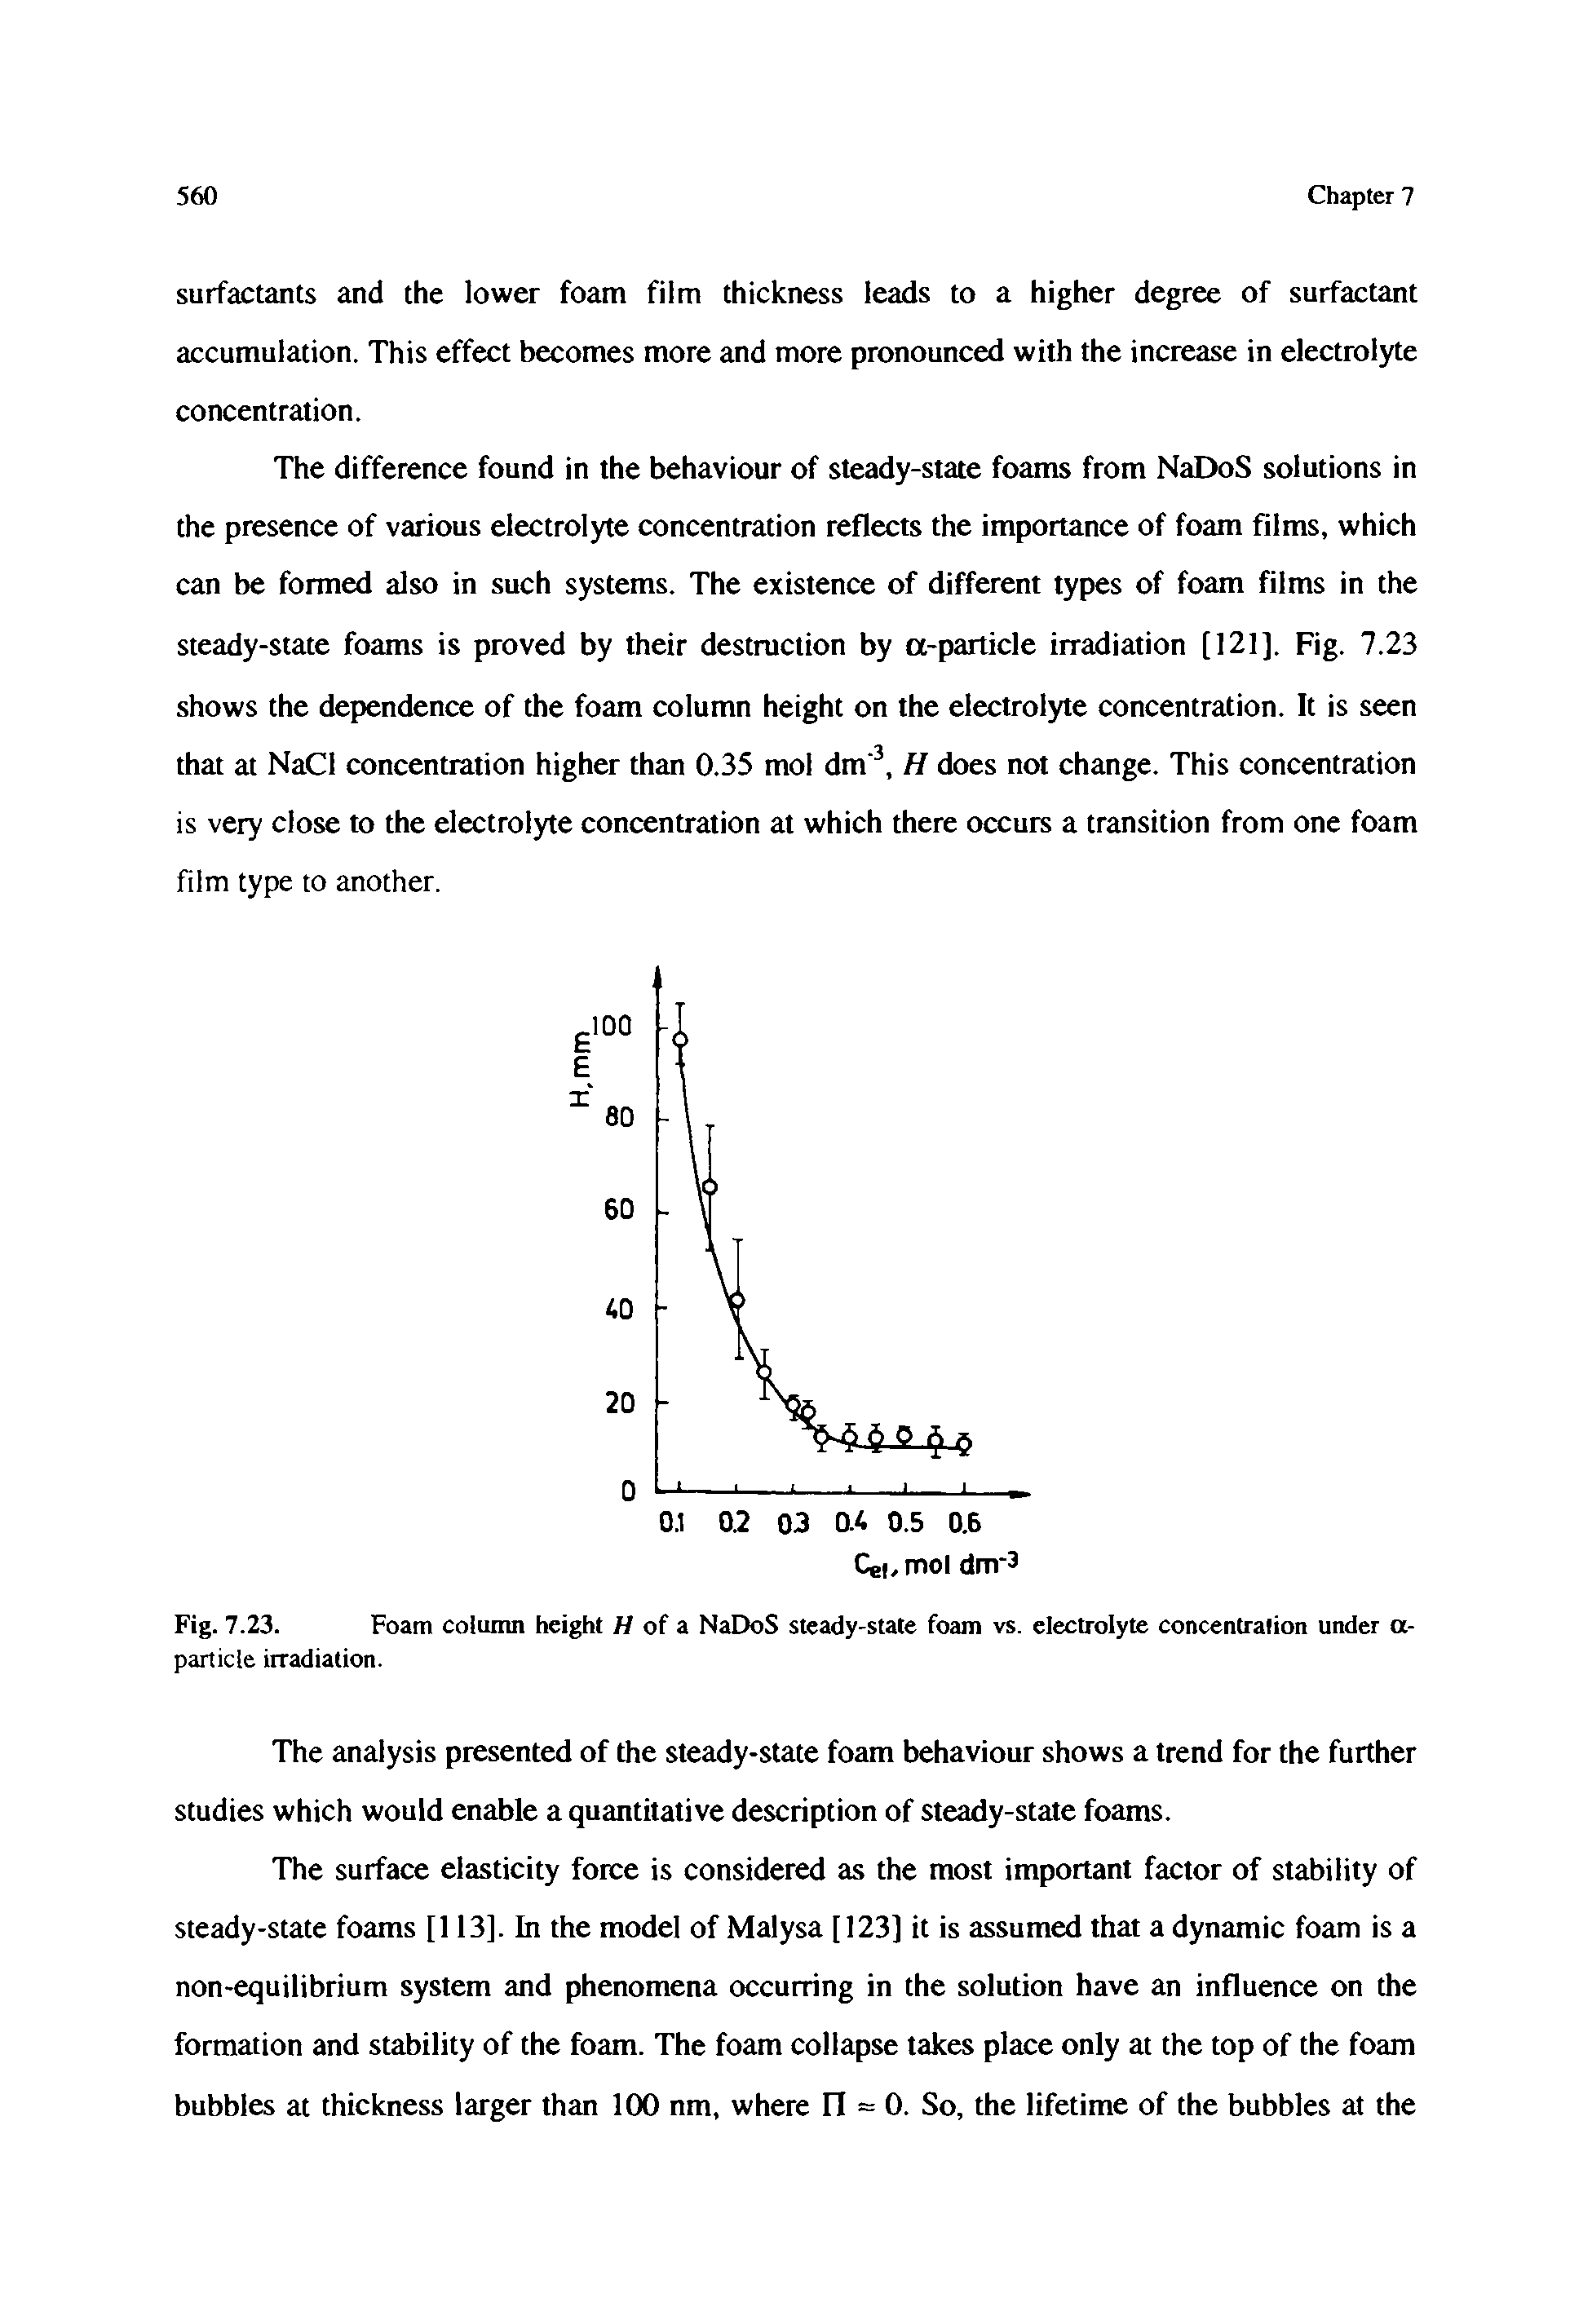 Fig. 7.23. Foam column height H of a NaDoS steady-state foam vs. electrolyte concentration under a-...